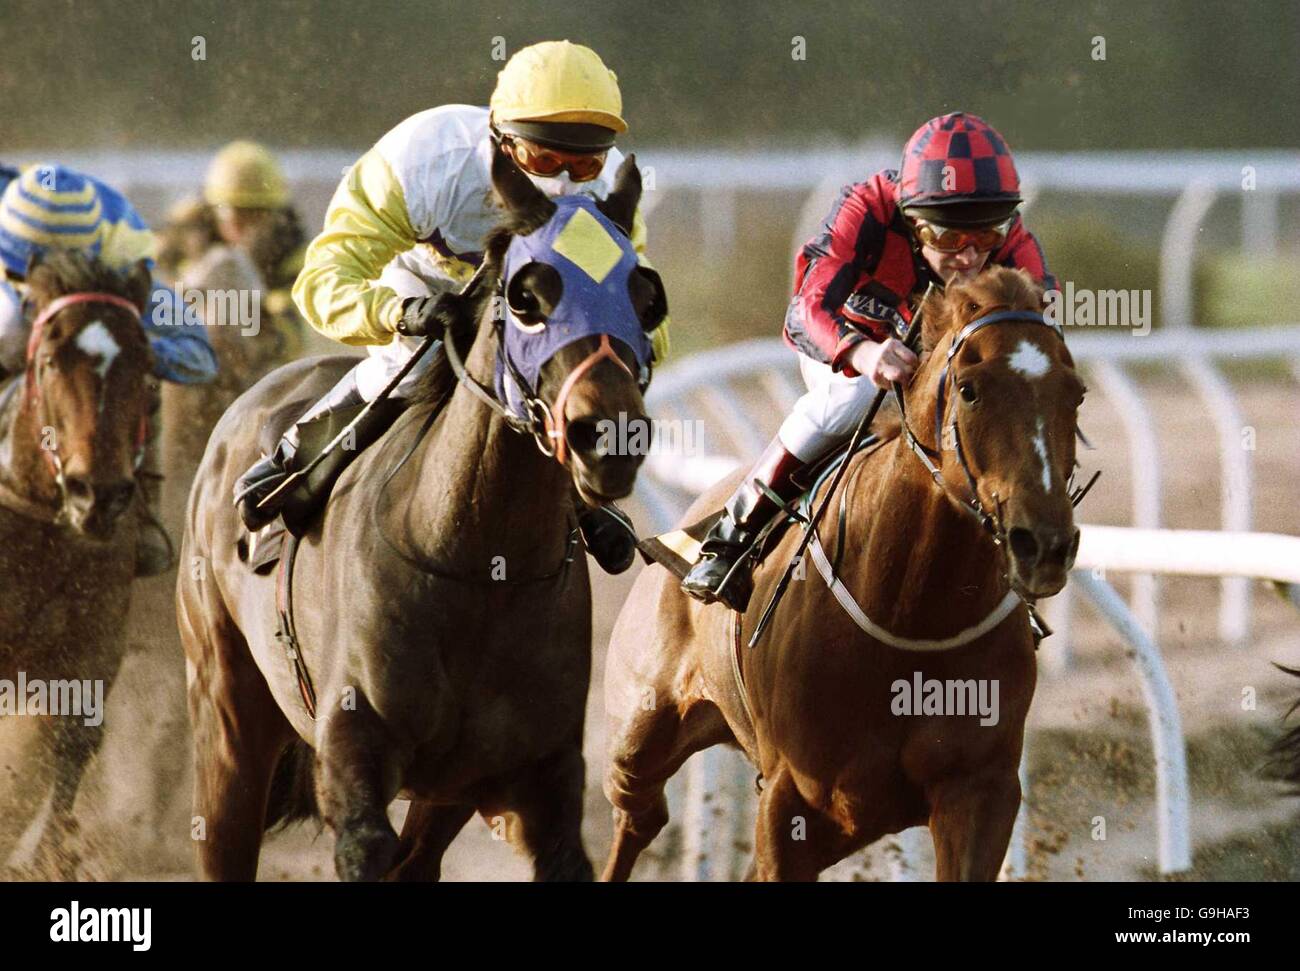 Dean Mernagh, riding Carrie Pooter (l), shakes off the challenge of Dane O'Neill on Branston Pickle to win the Thomas 'Fats' Waller Stakes at Wolverhampton Stock Photo